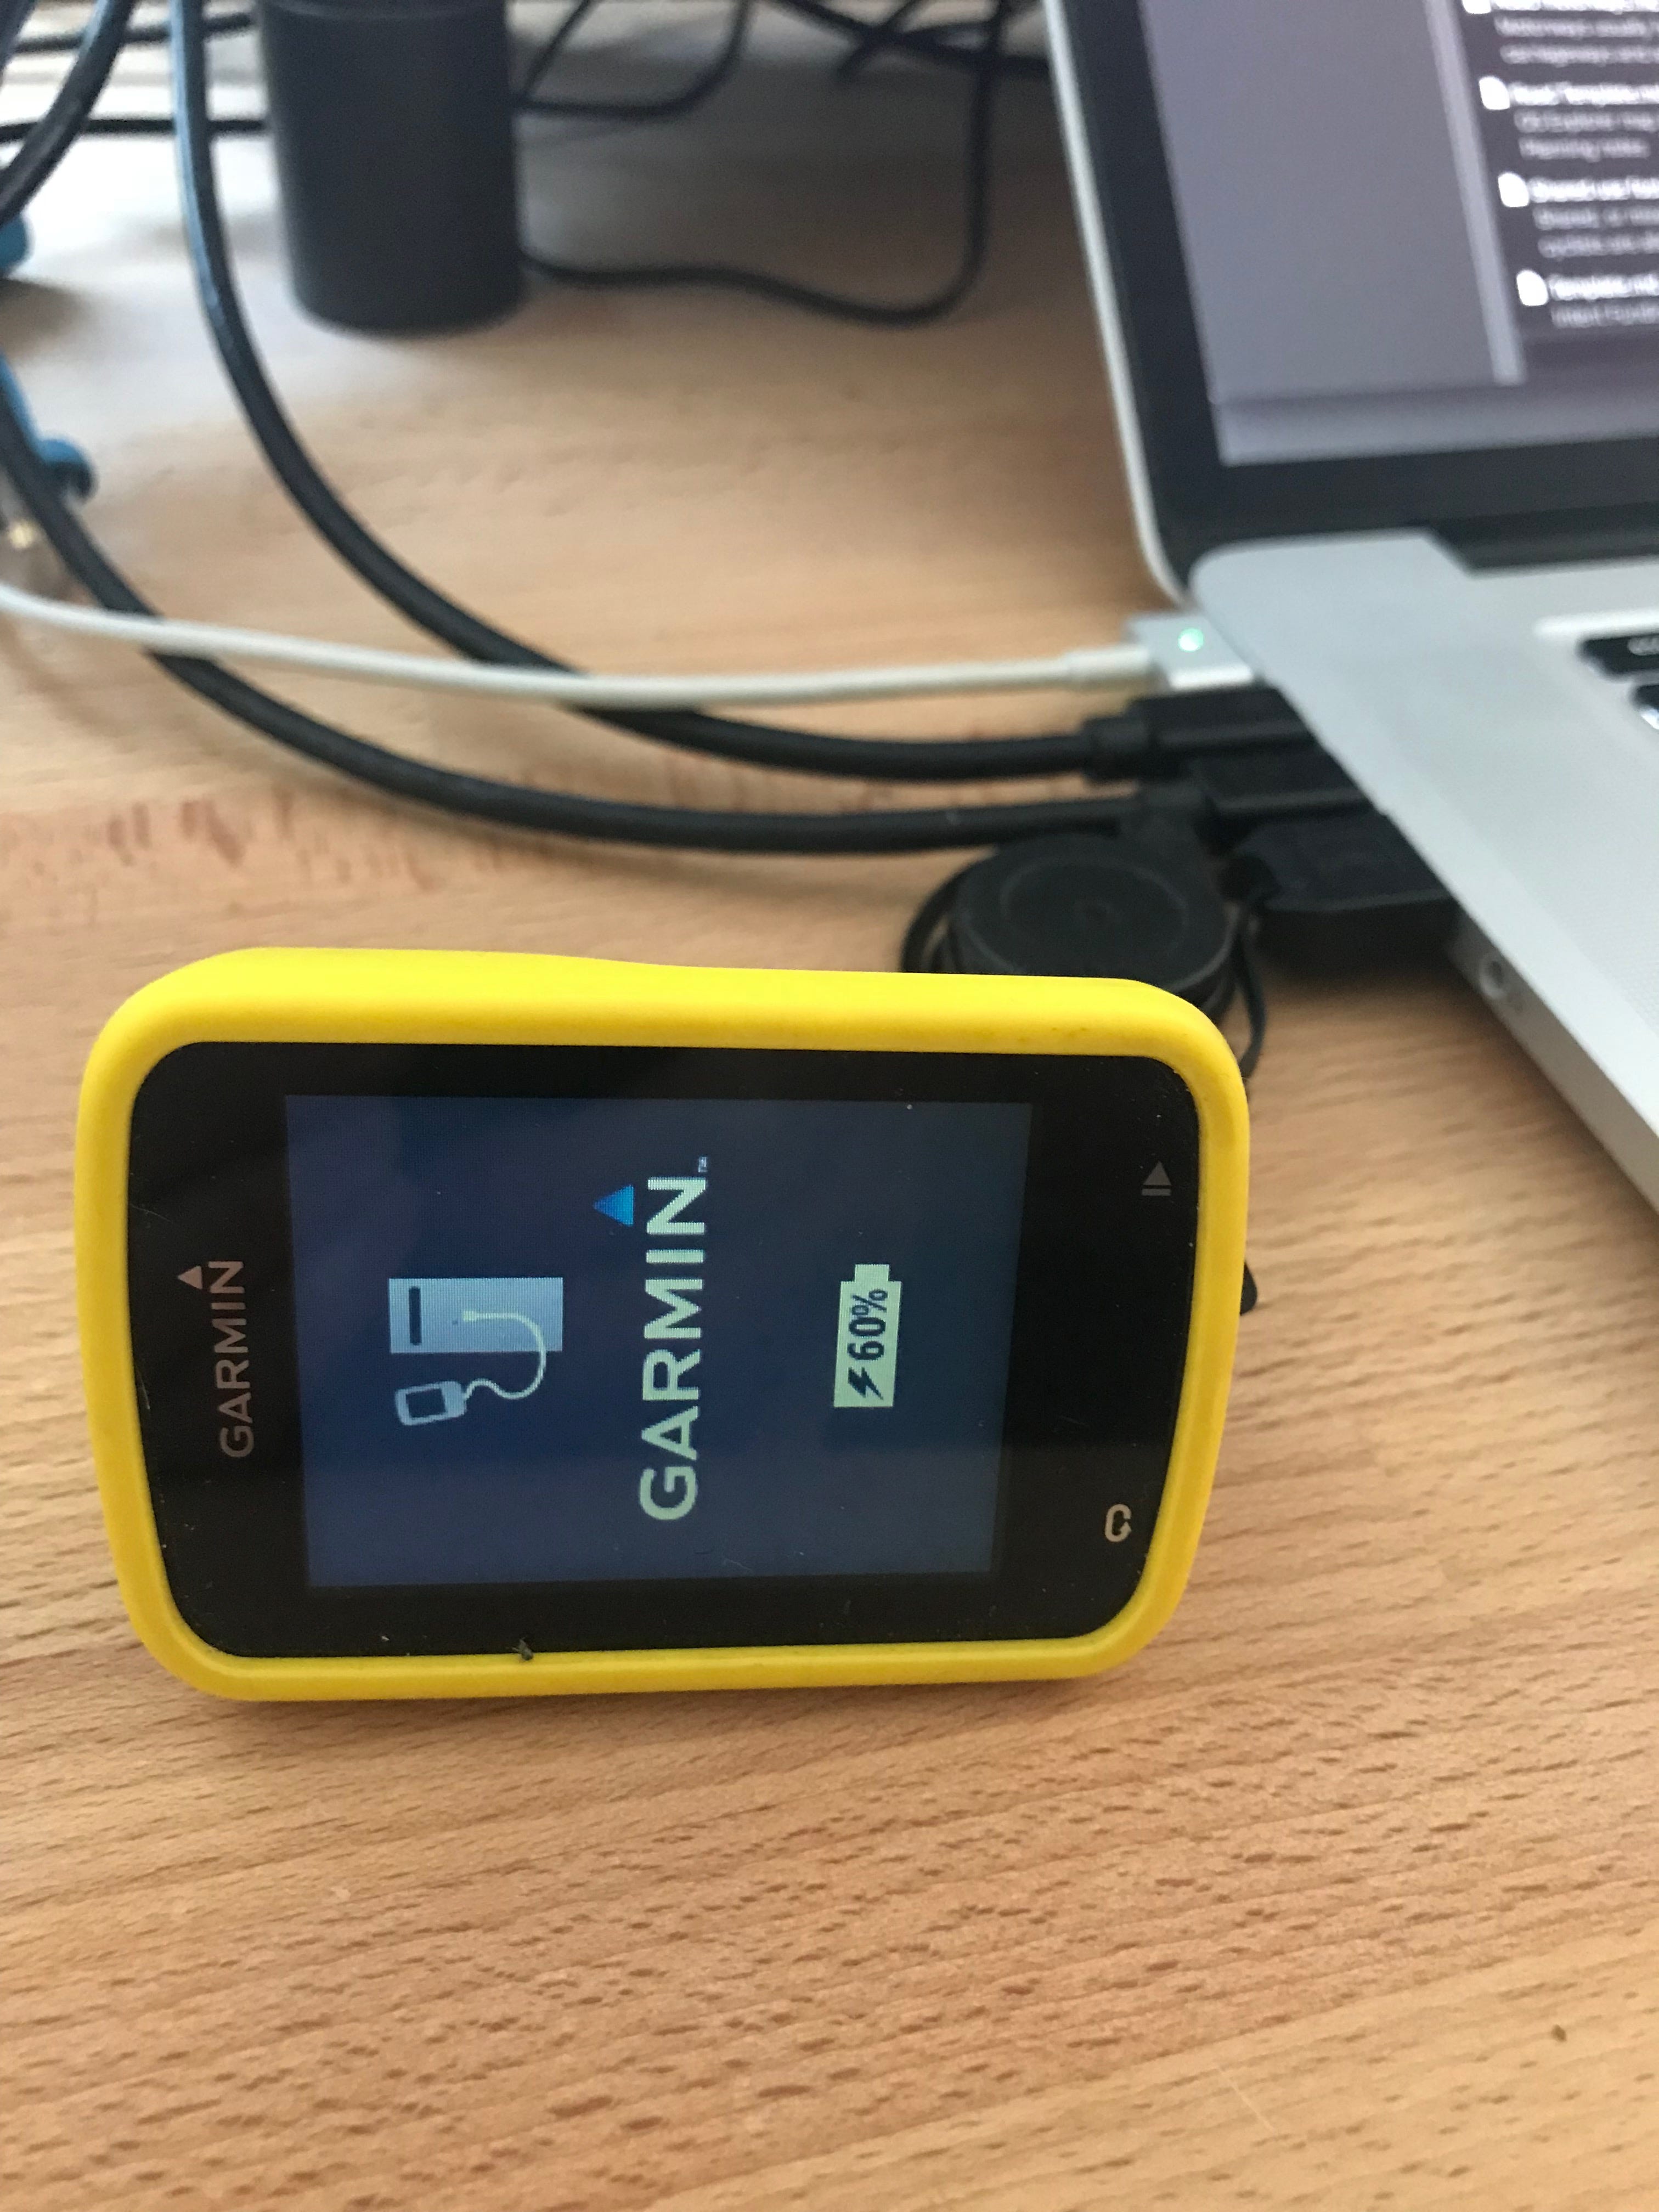 Uploading GPX track files onto the Garmin 820 from a Mac and iPhone | by  Jon Hume | Medium